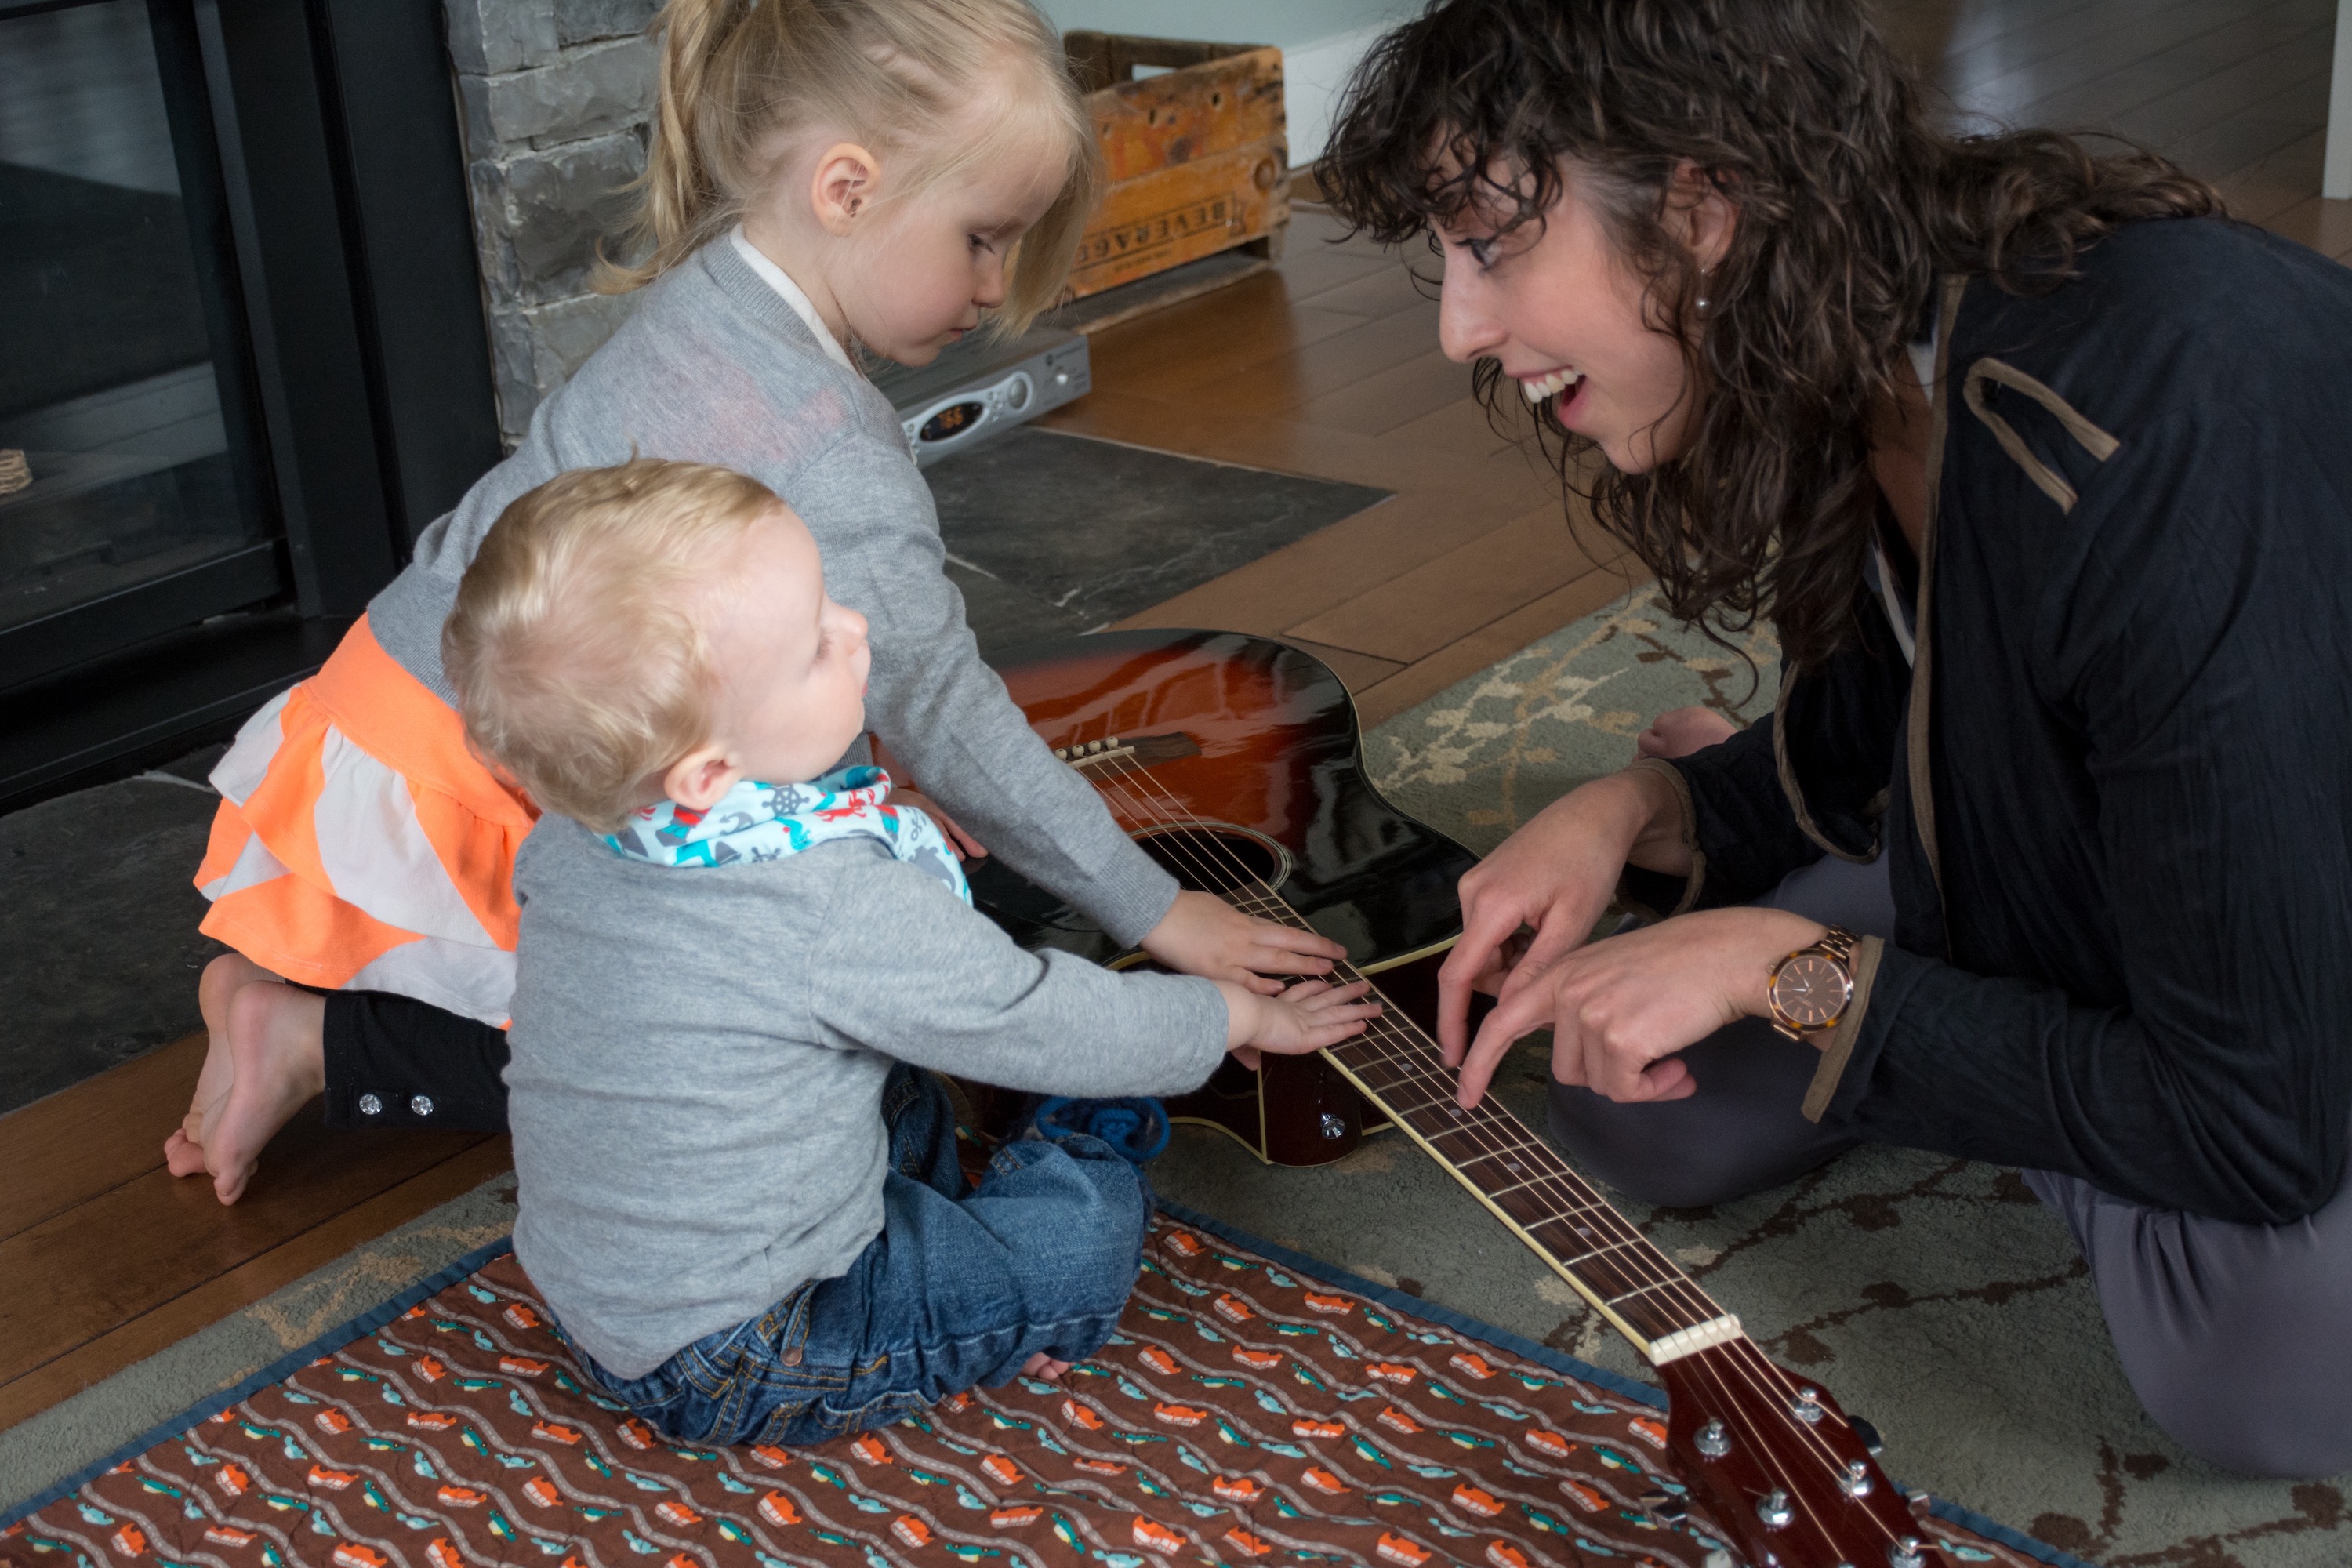 Children. Infants. Guitar. Playing Instruments. Smiling. Laughing. Find Your Voice Music Therapy. Kingston, Ontario. Halifax, Nova Scotia. Mackenzie Costron. Accredited Music Therapist. Registered Counselling Therapist.